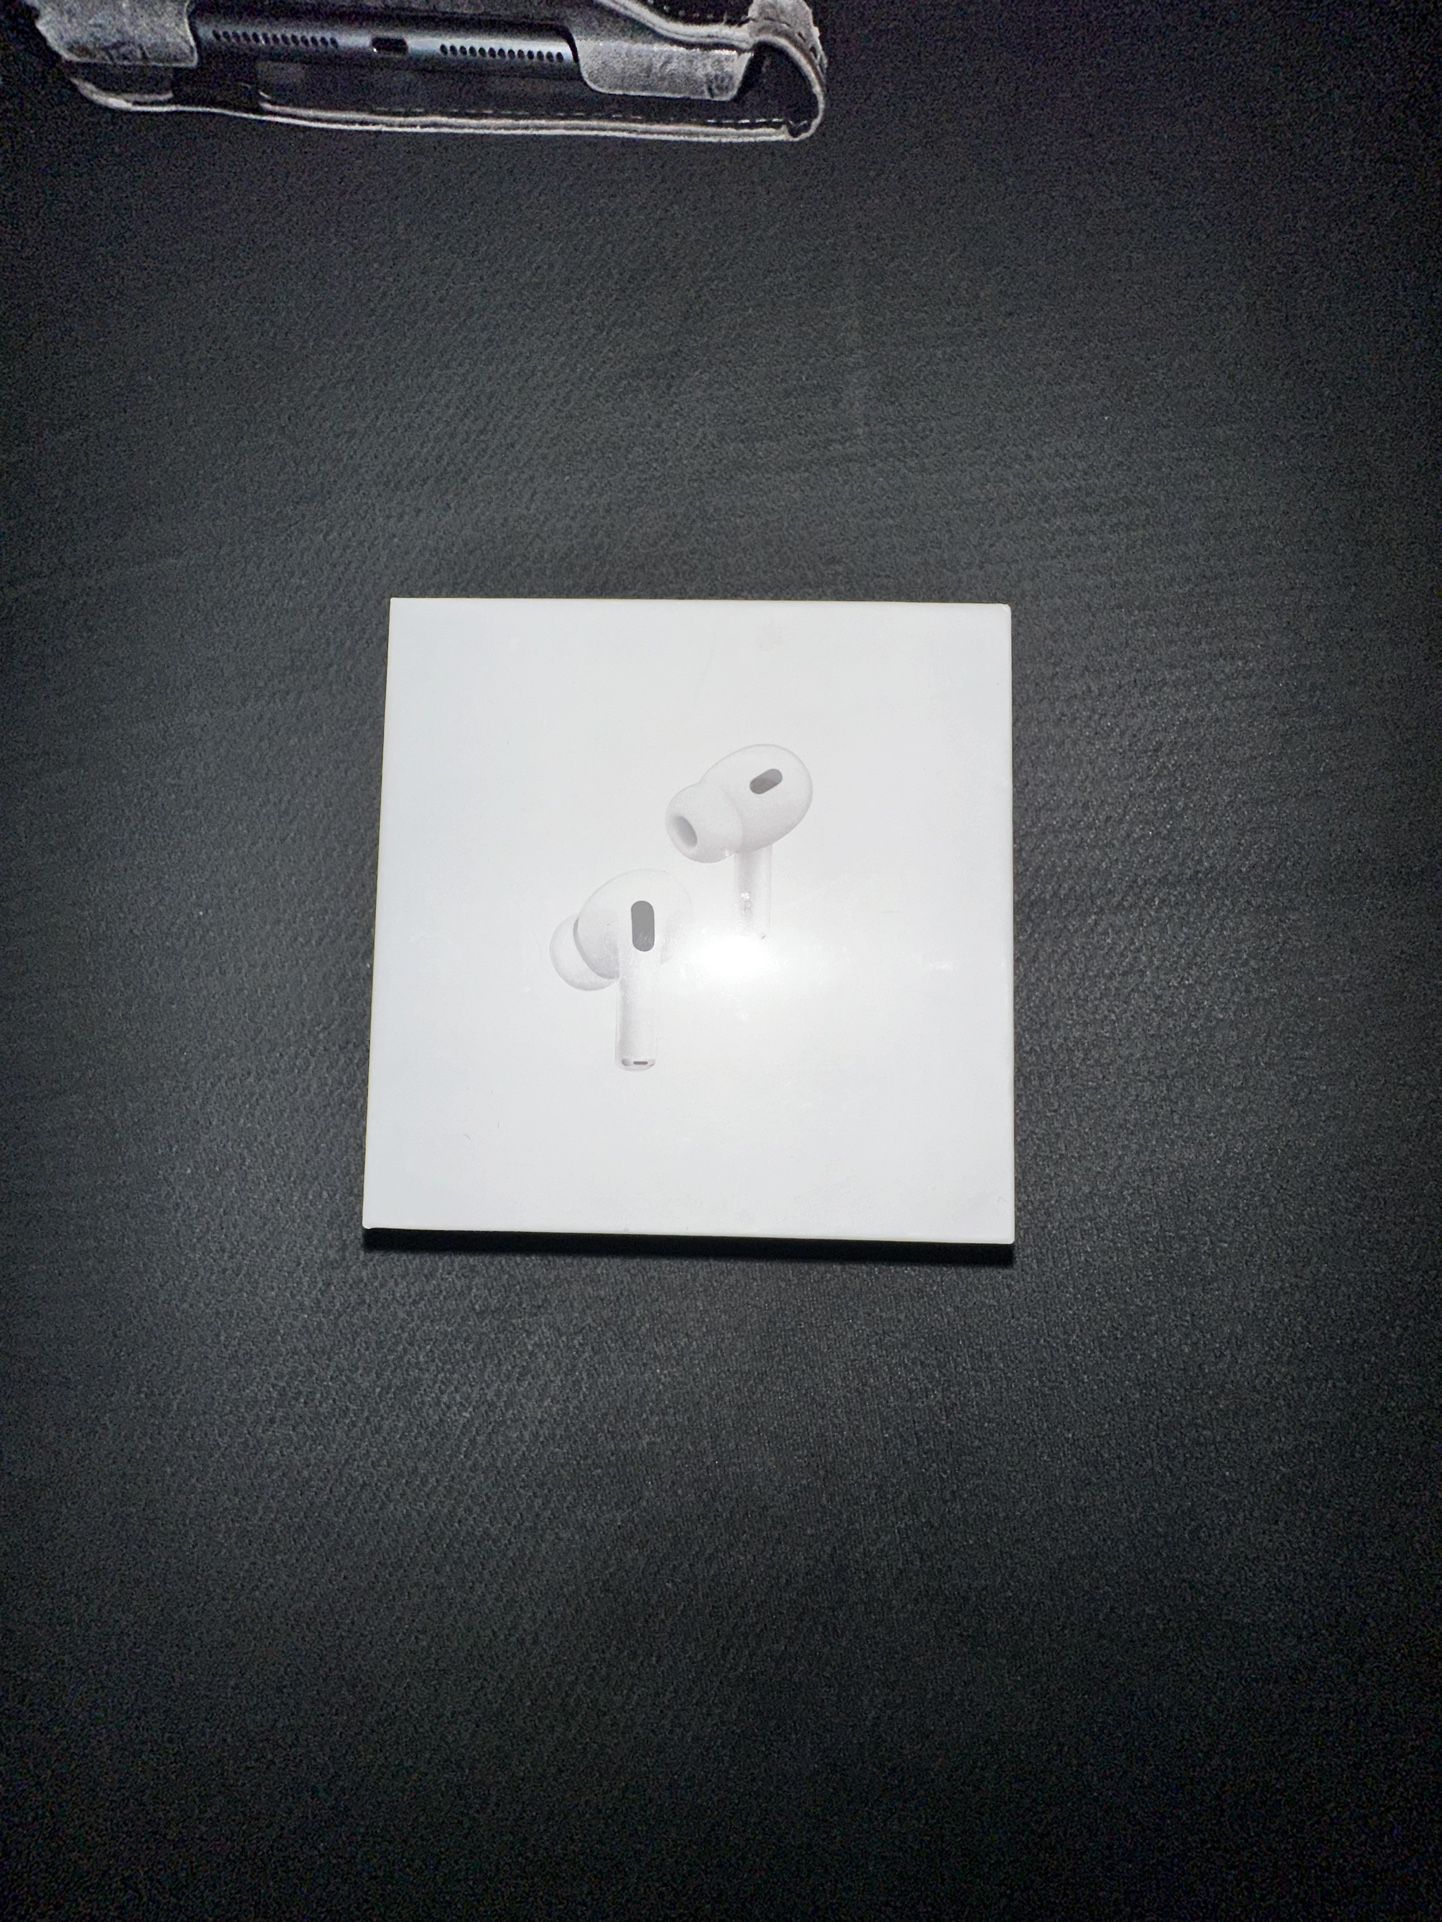 Brand New Sealed And Unopened AirPods 2nd Generation 